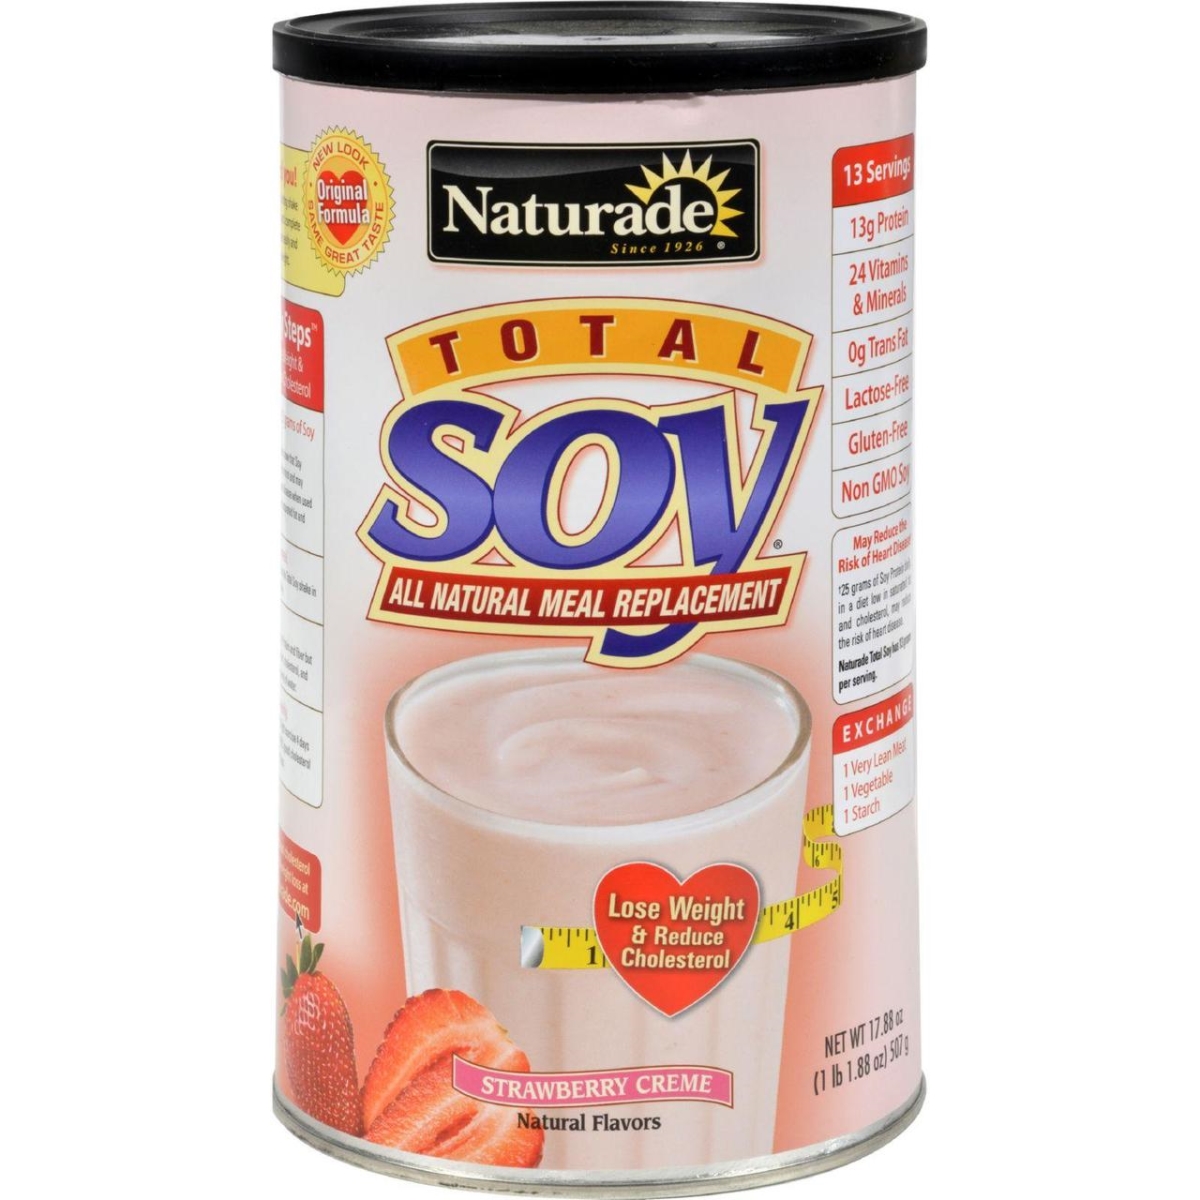 Hg0919878 17.88 Oz Total Soy Meal Replacement Strawberry Creme